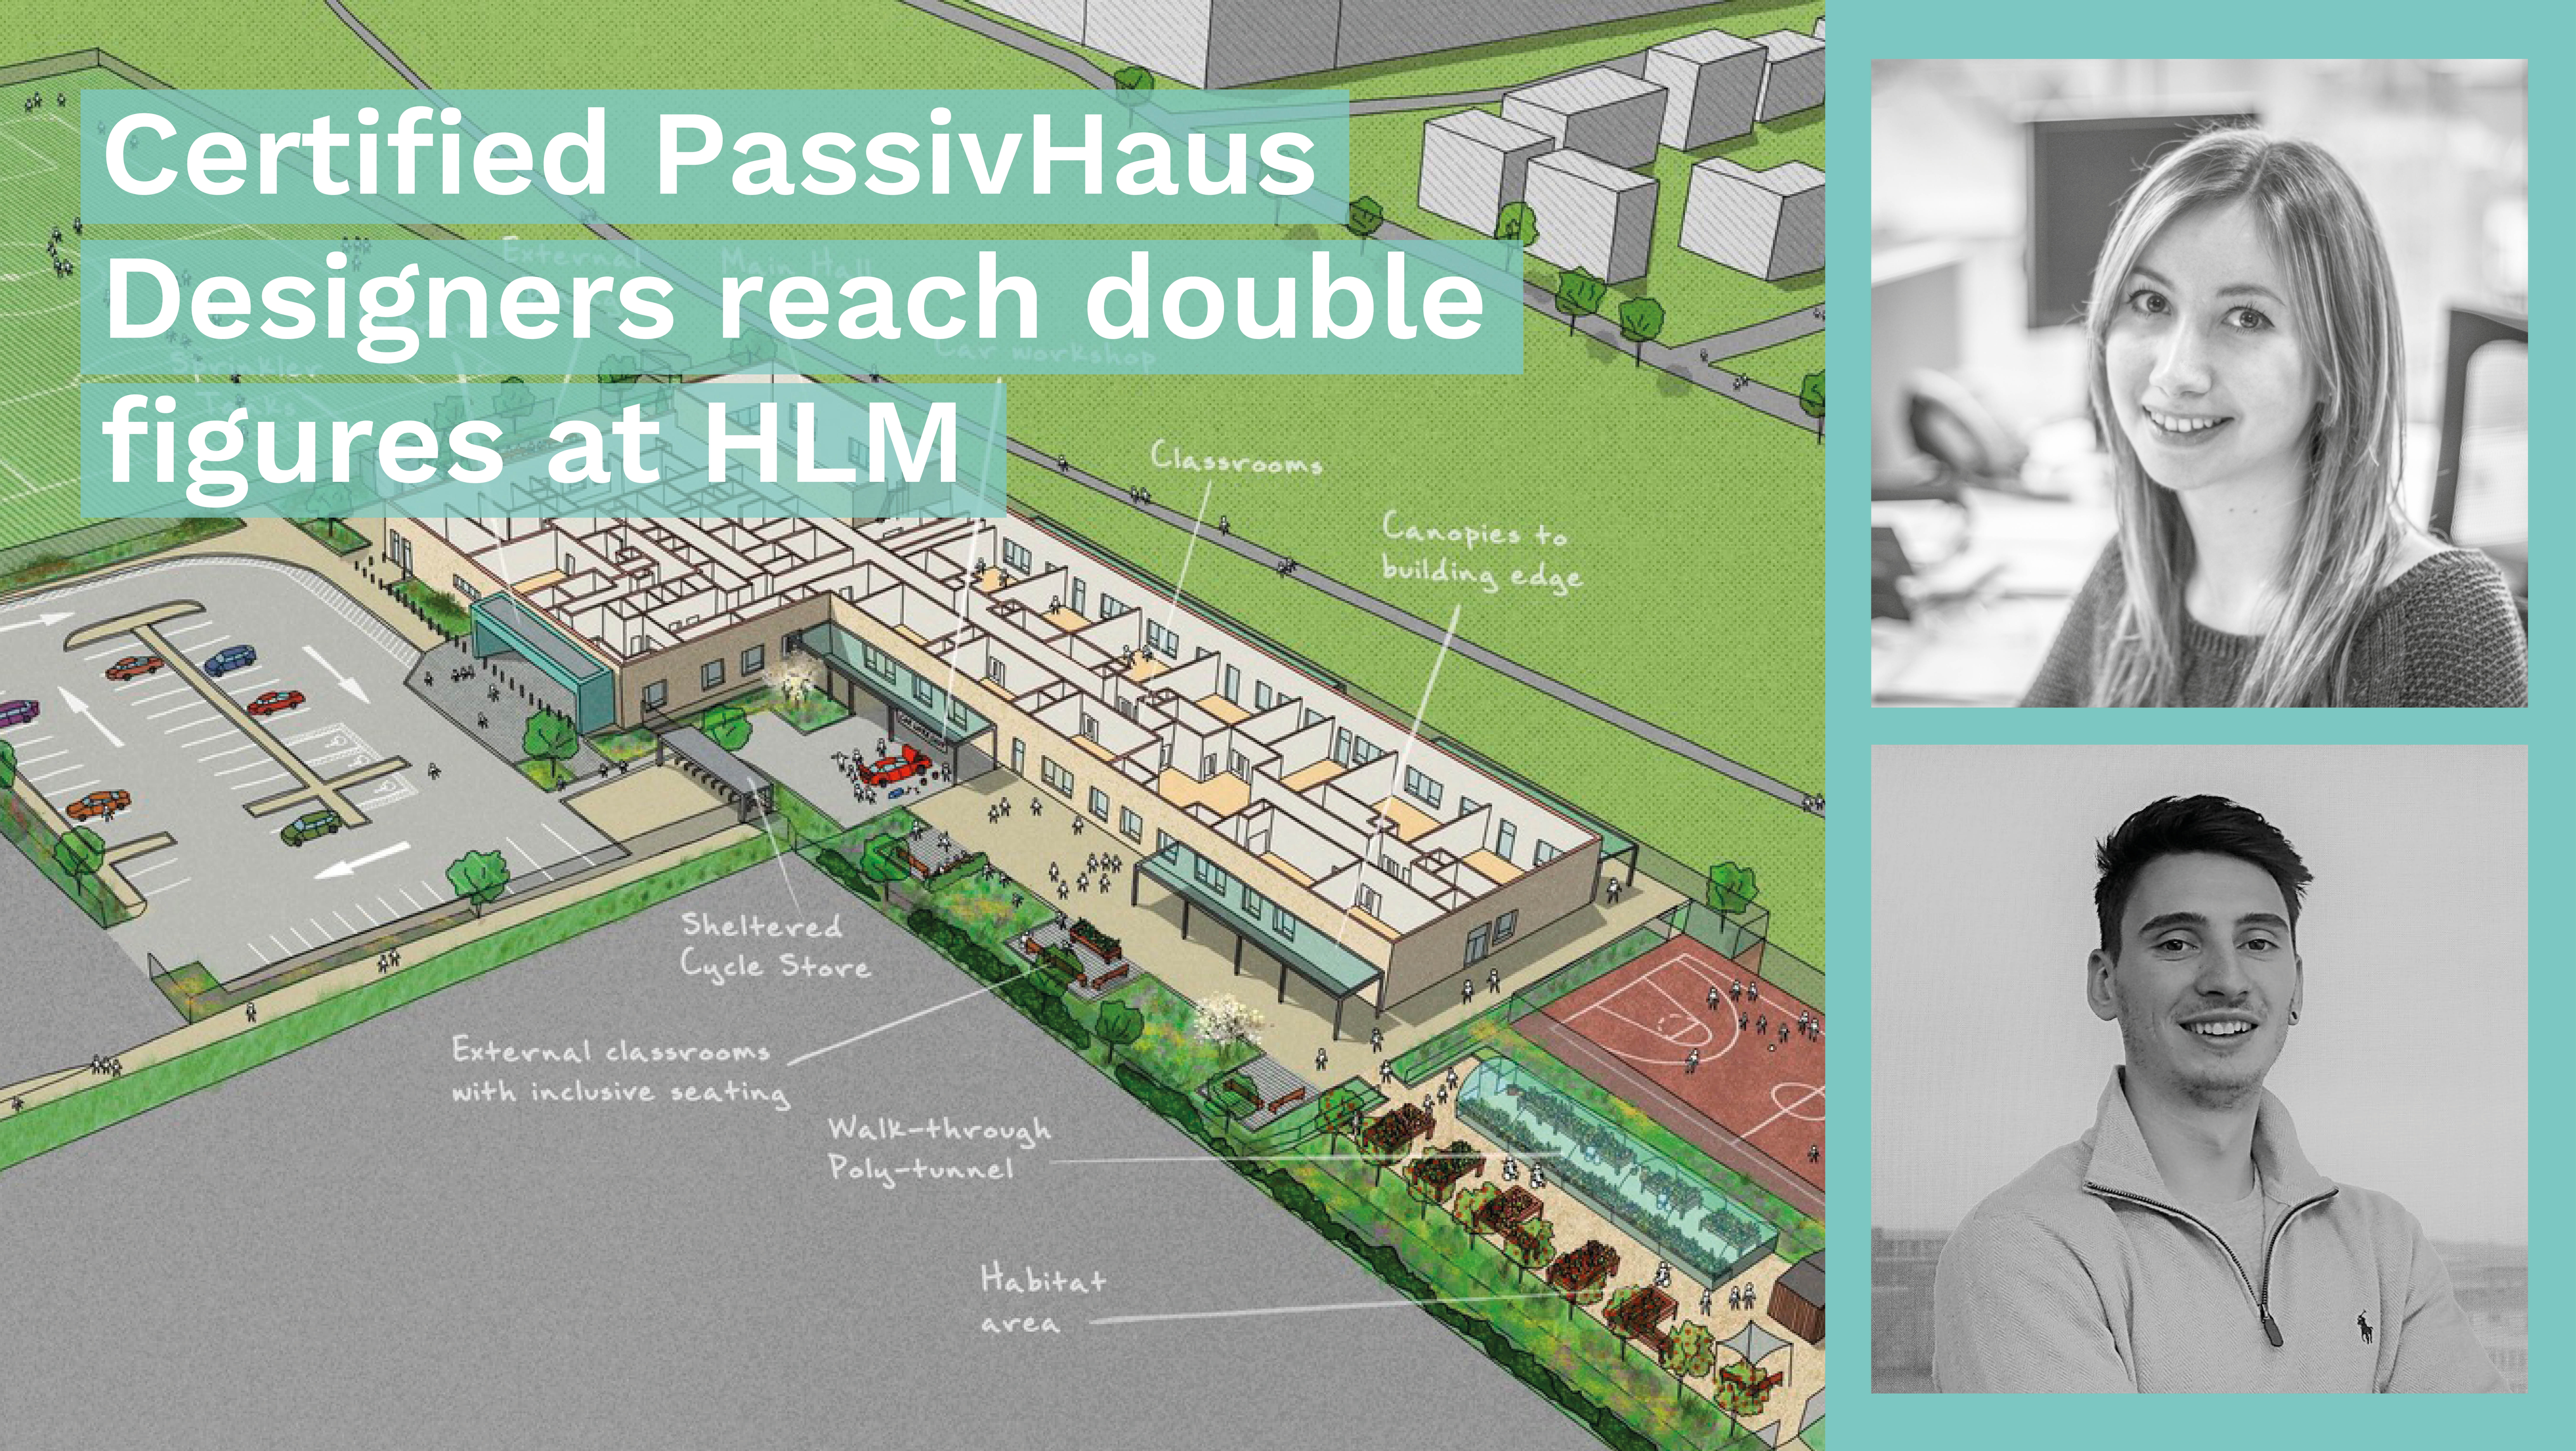 Two newly qualified PassivHaus Designers at HLM Architects